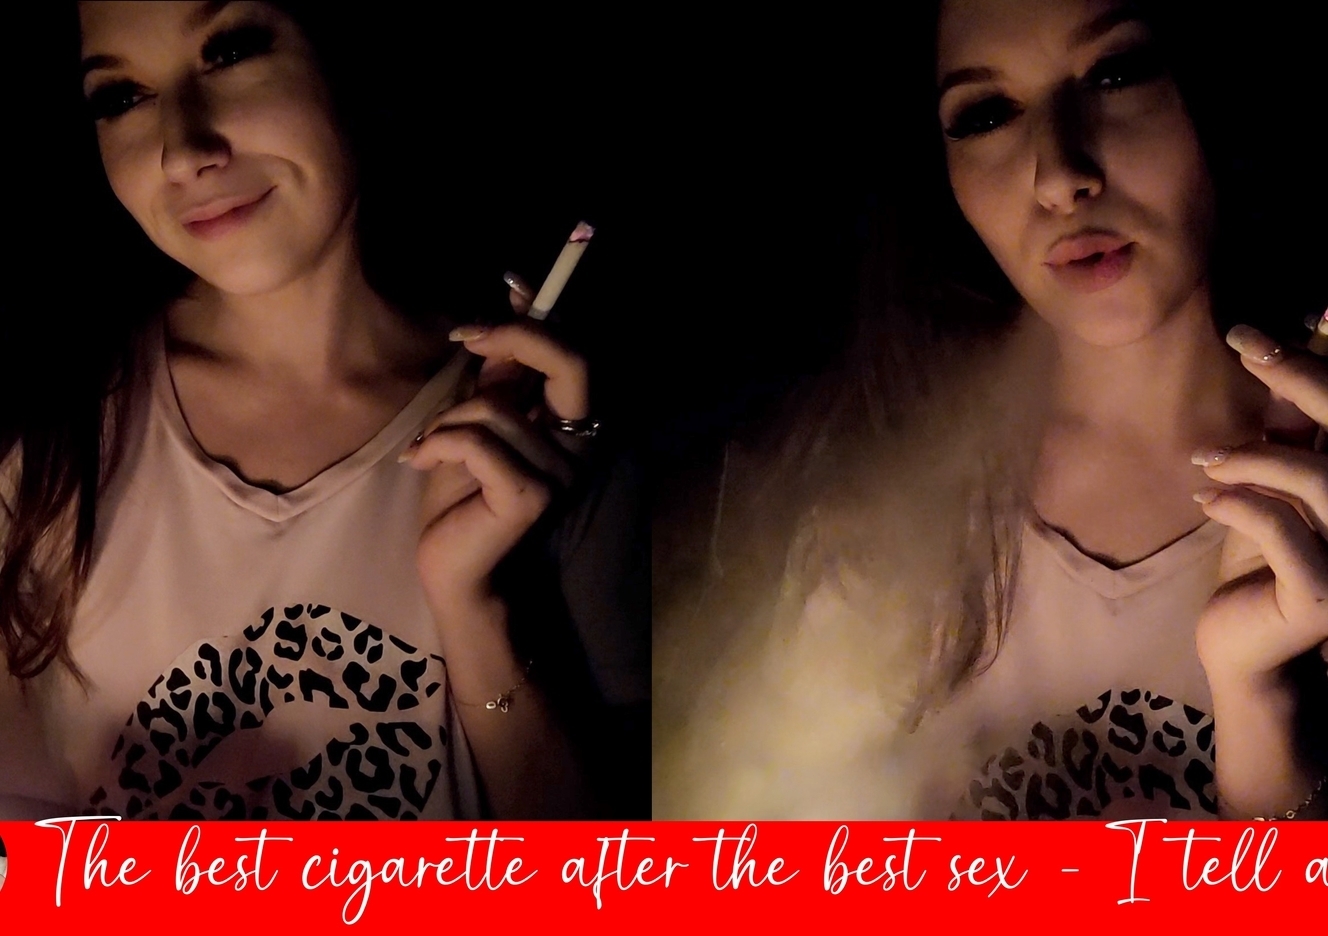 After Sex After NO SEX for 2 Days!! - Real-Smoking-Girl - Official Site of Real Smoking Girl